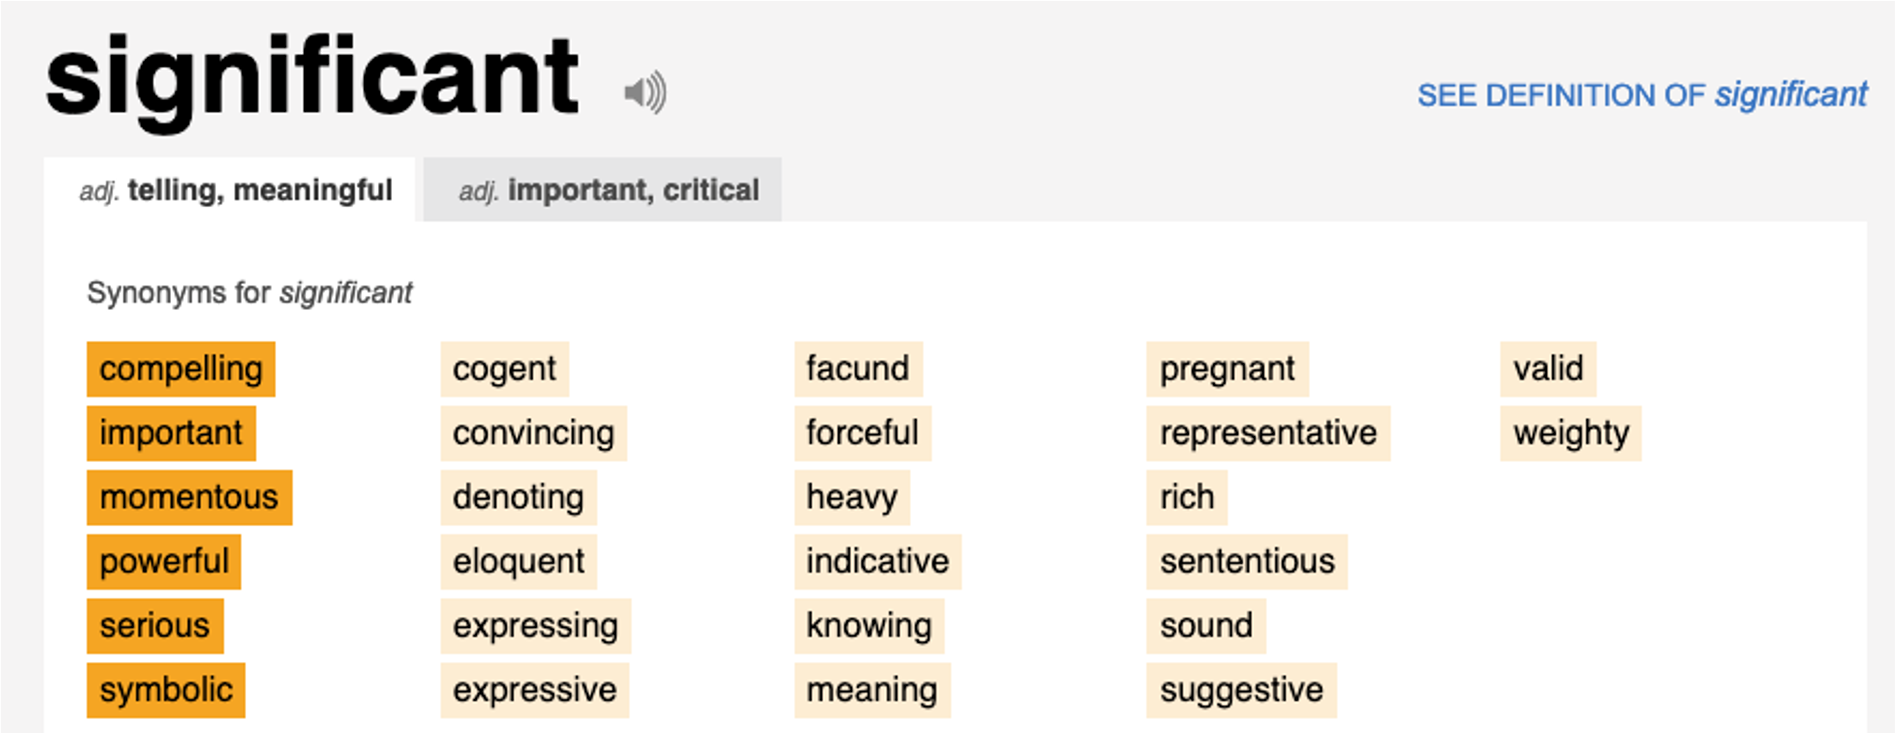 Screenshot from Thesaurus.com showng synonyms of the word significant